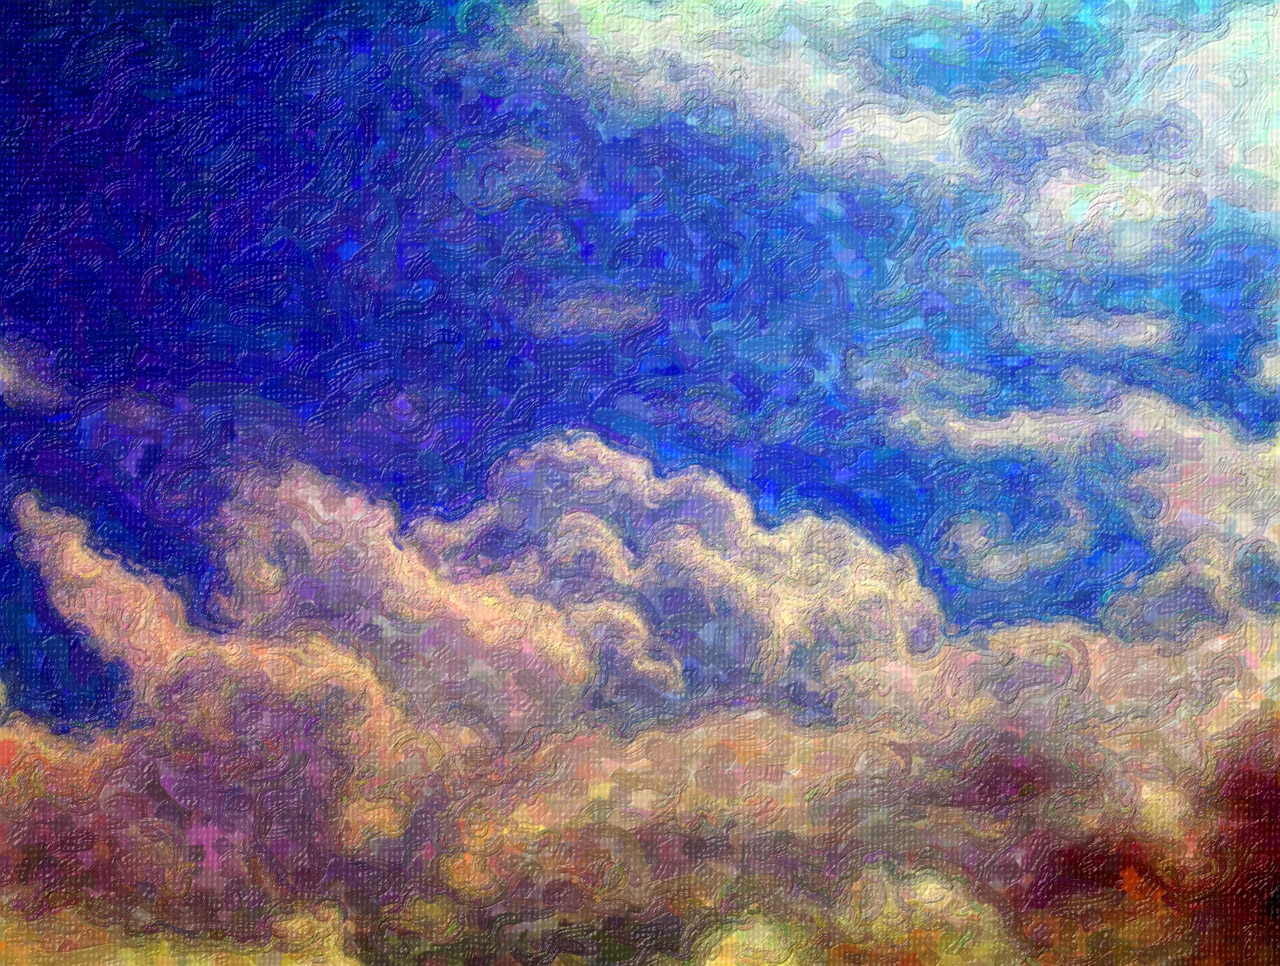 http://www.publicdomainpictures.net/pictures/20000/velka/clouds-painting-110661299803951DoX.jpg